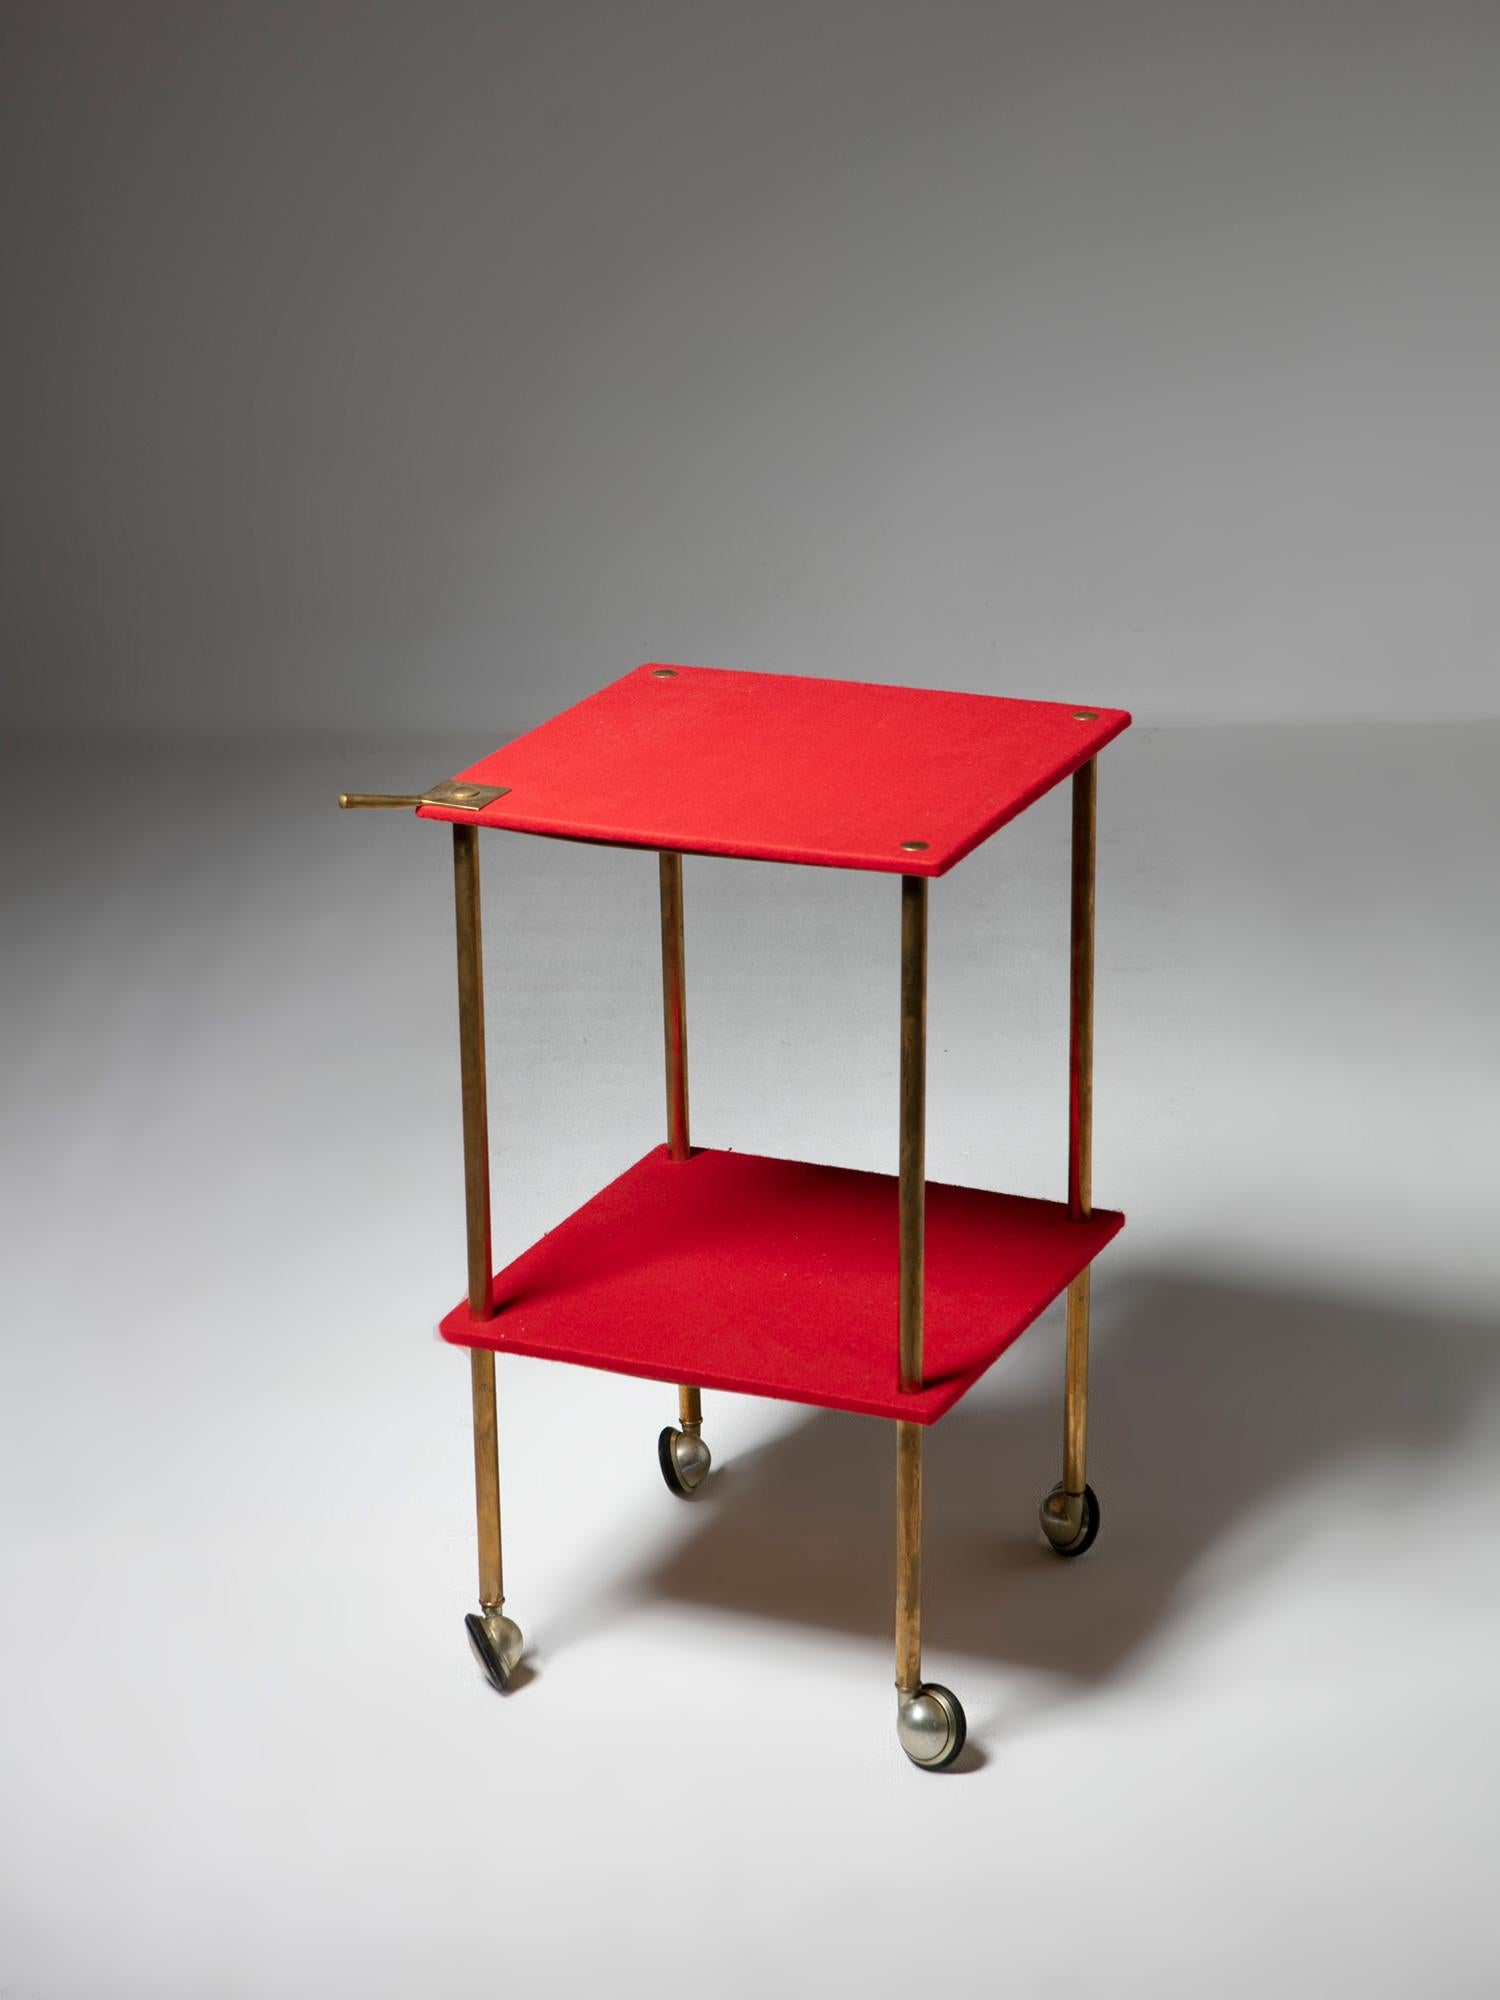 Rare side table/cart model T9 by Luigi Caccia Dominioni for Azucena.
Wood panels covered with red felt, brass frame.